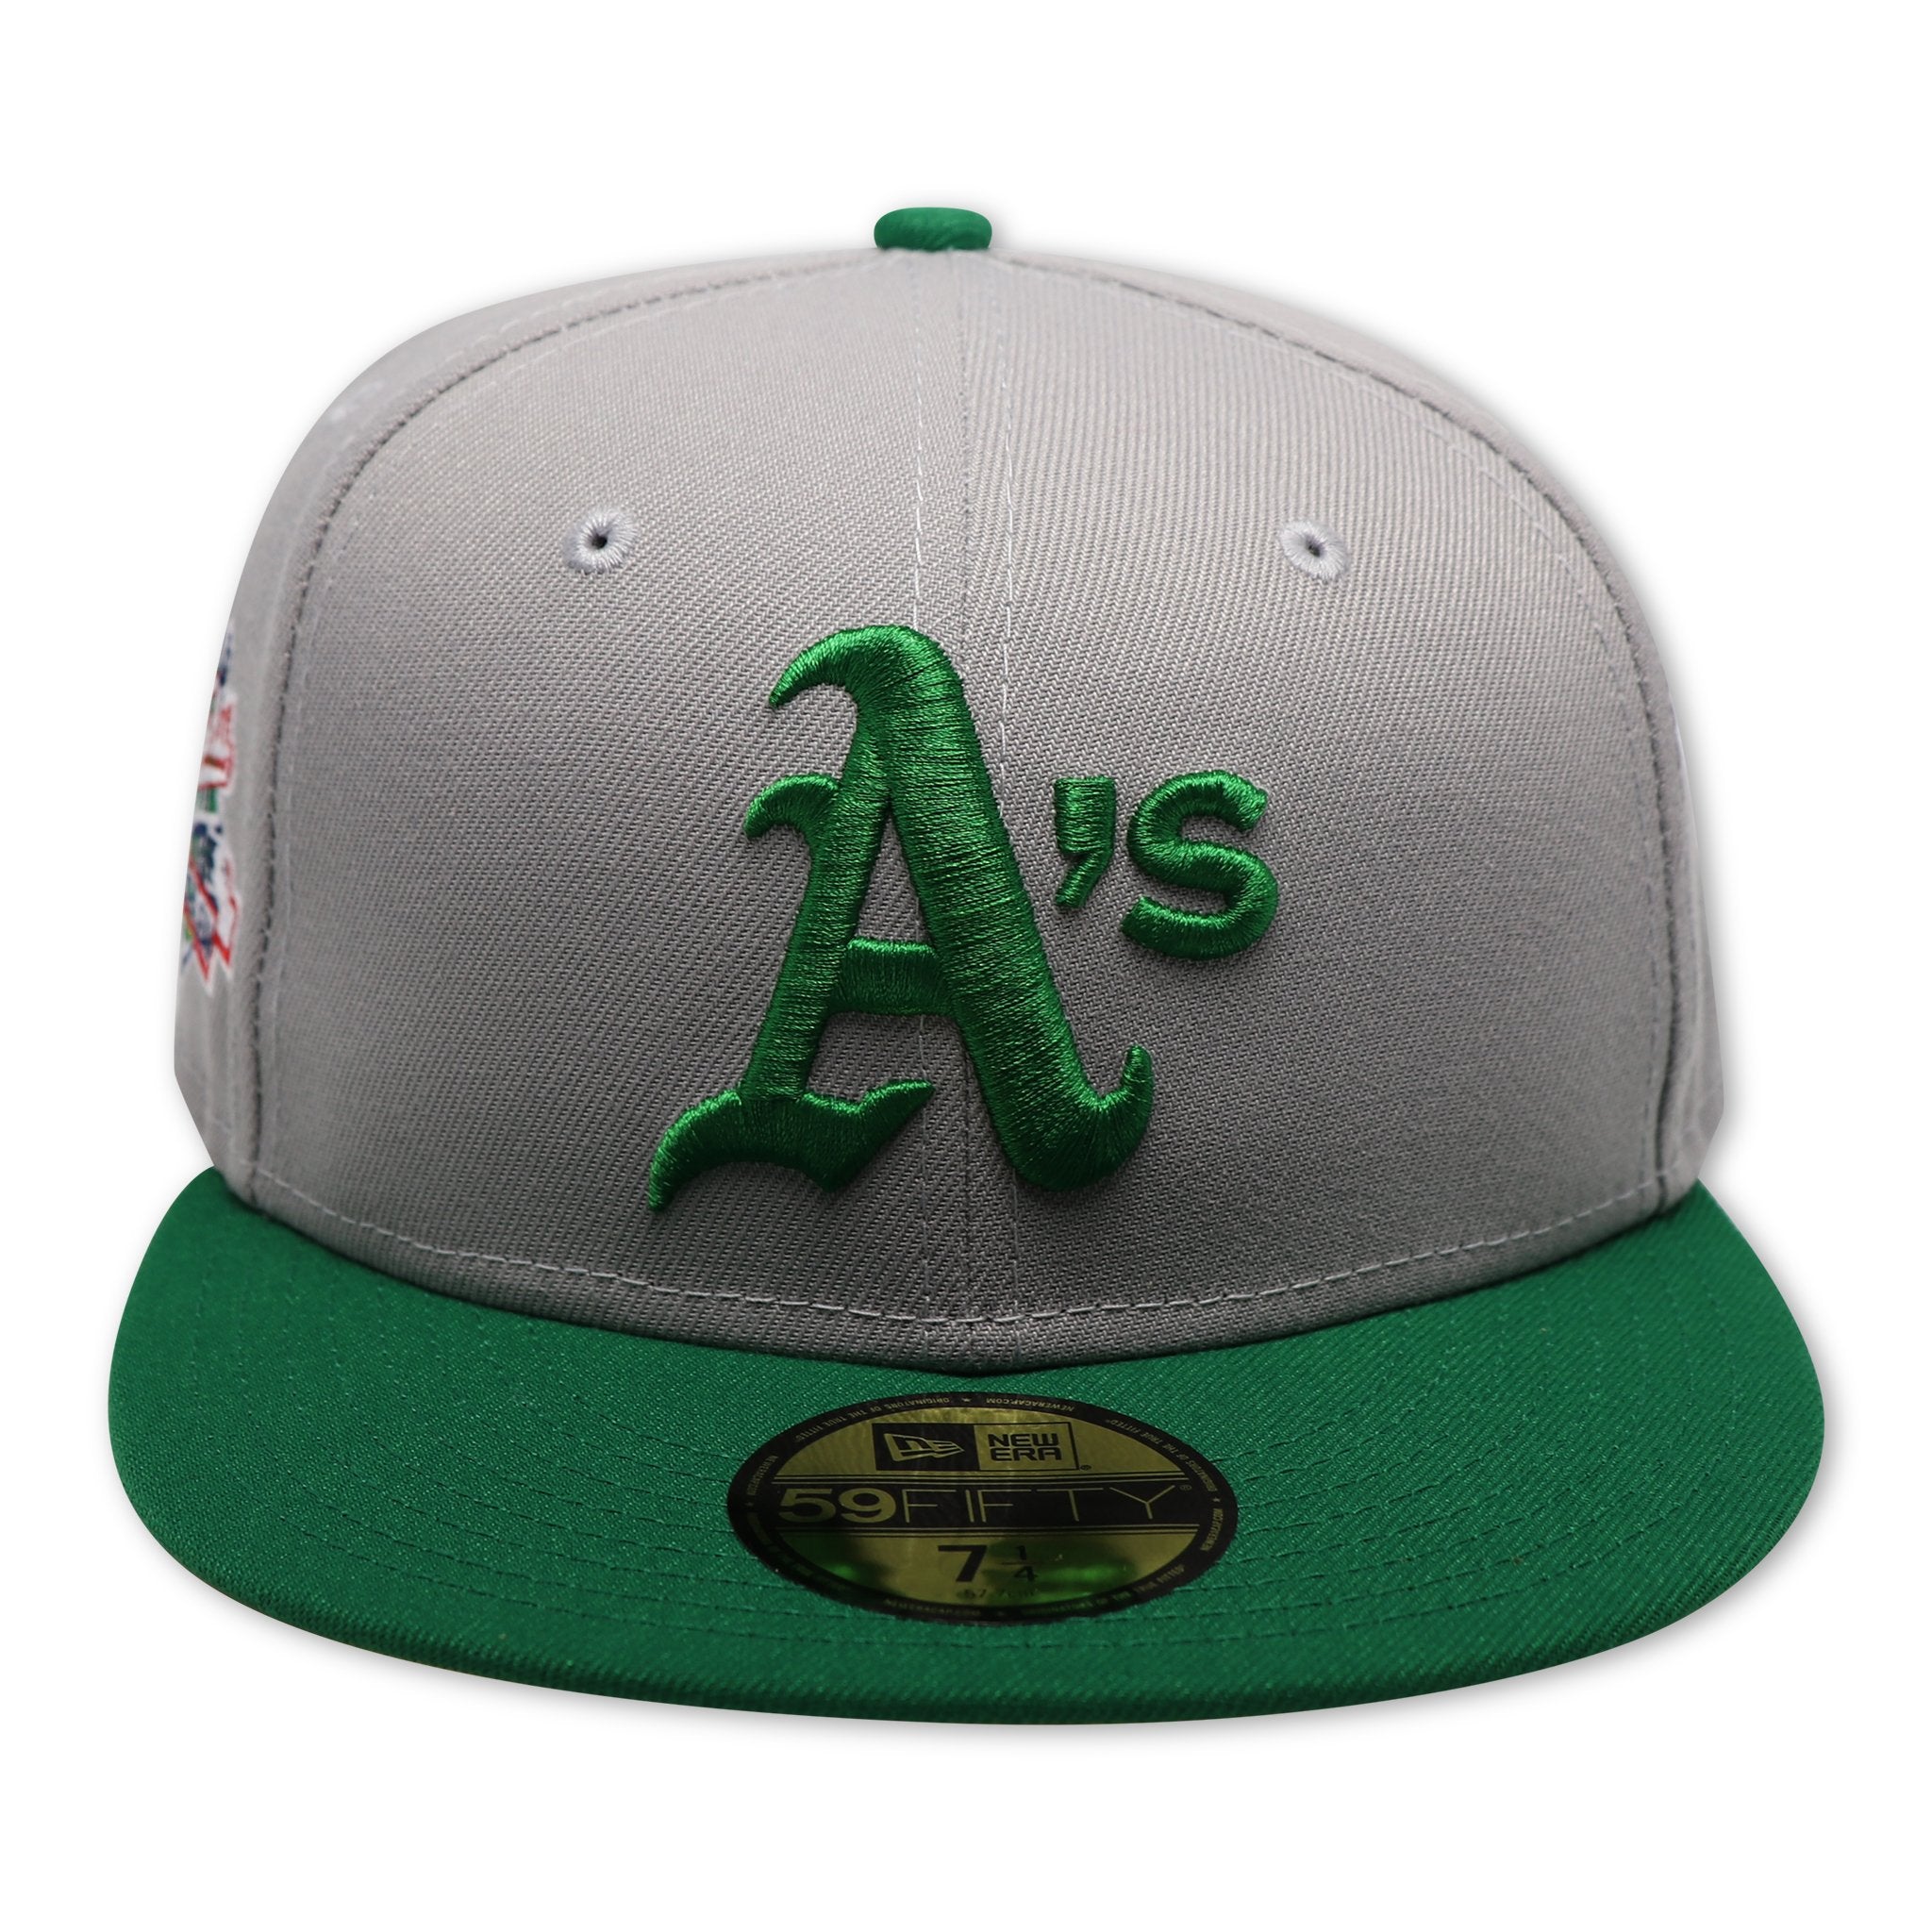 OAKLAND ATHLETICS (GREY) "1989 WORLDSRIES BATTLE OF THE BAY" 59FIFTY FITTED (YELLOW BOTTOM"